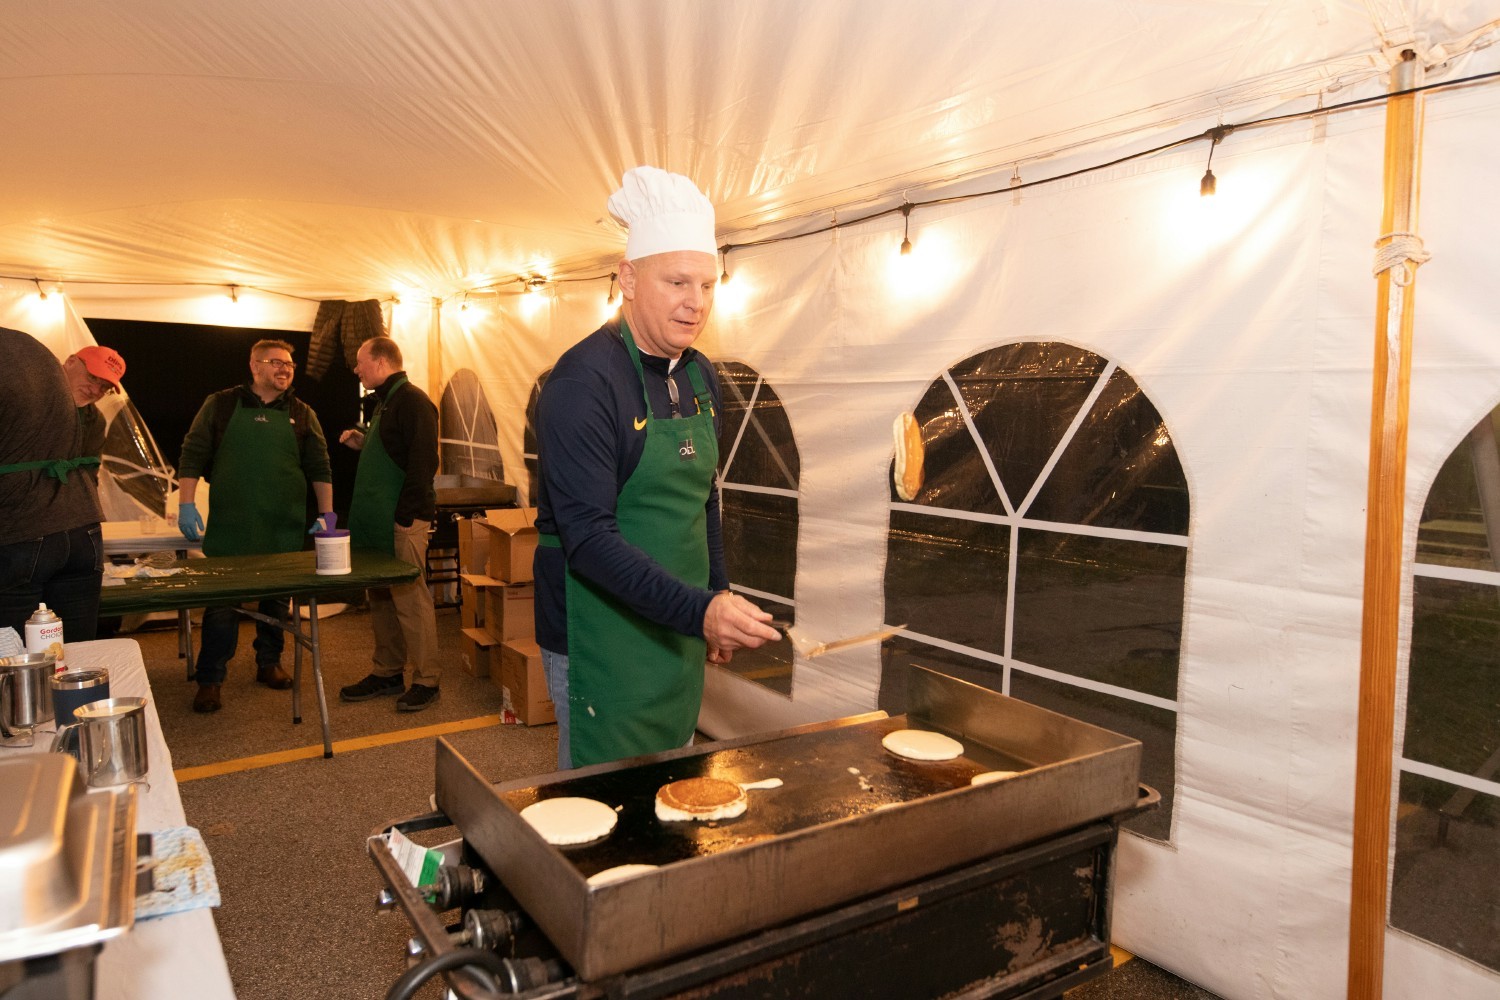 Once a year our leadership team prepares and serves breakfast by hand.  Dave Klein, our COO is pictured making pancakes.